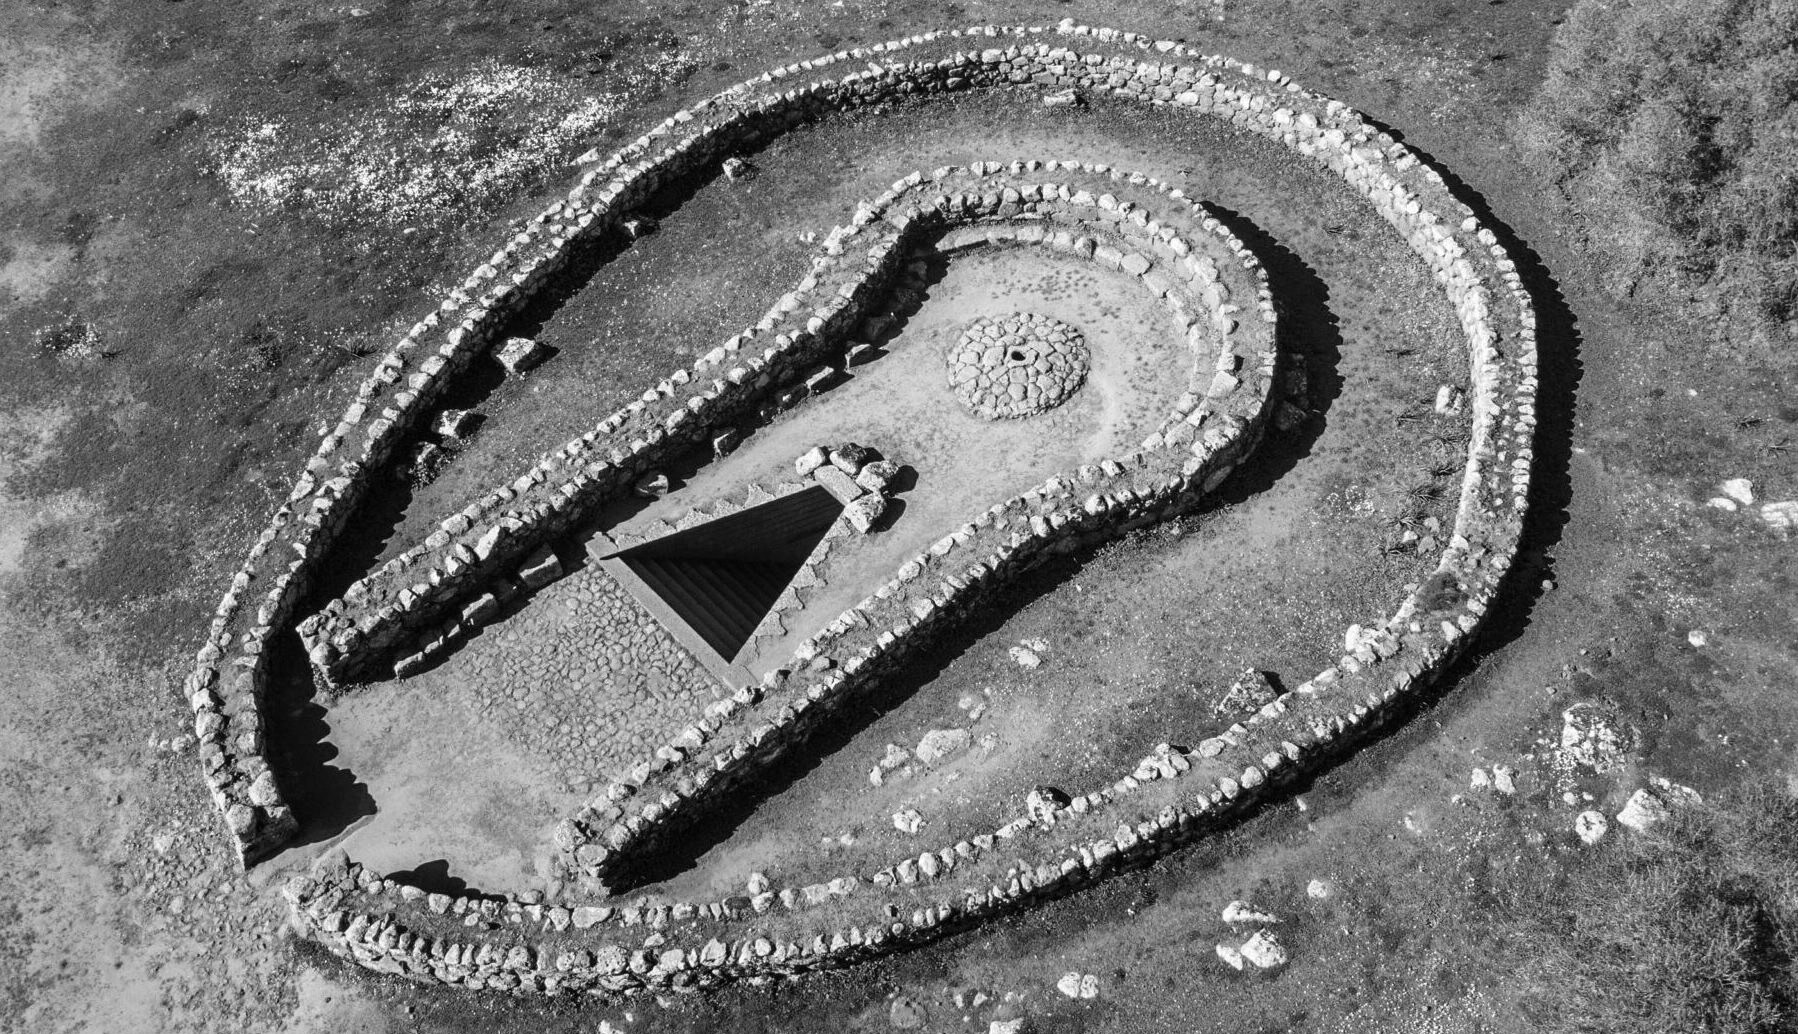 An aerial view of the Sacred Well. Depositphotos.